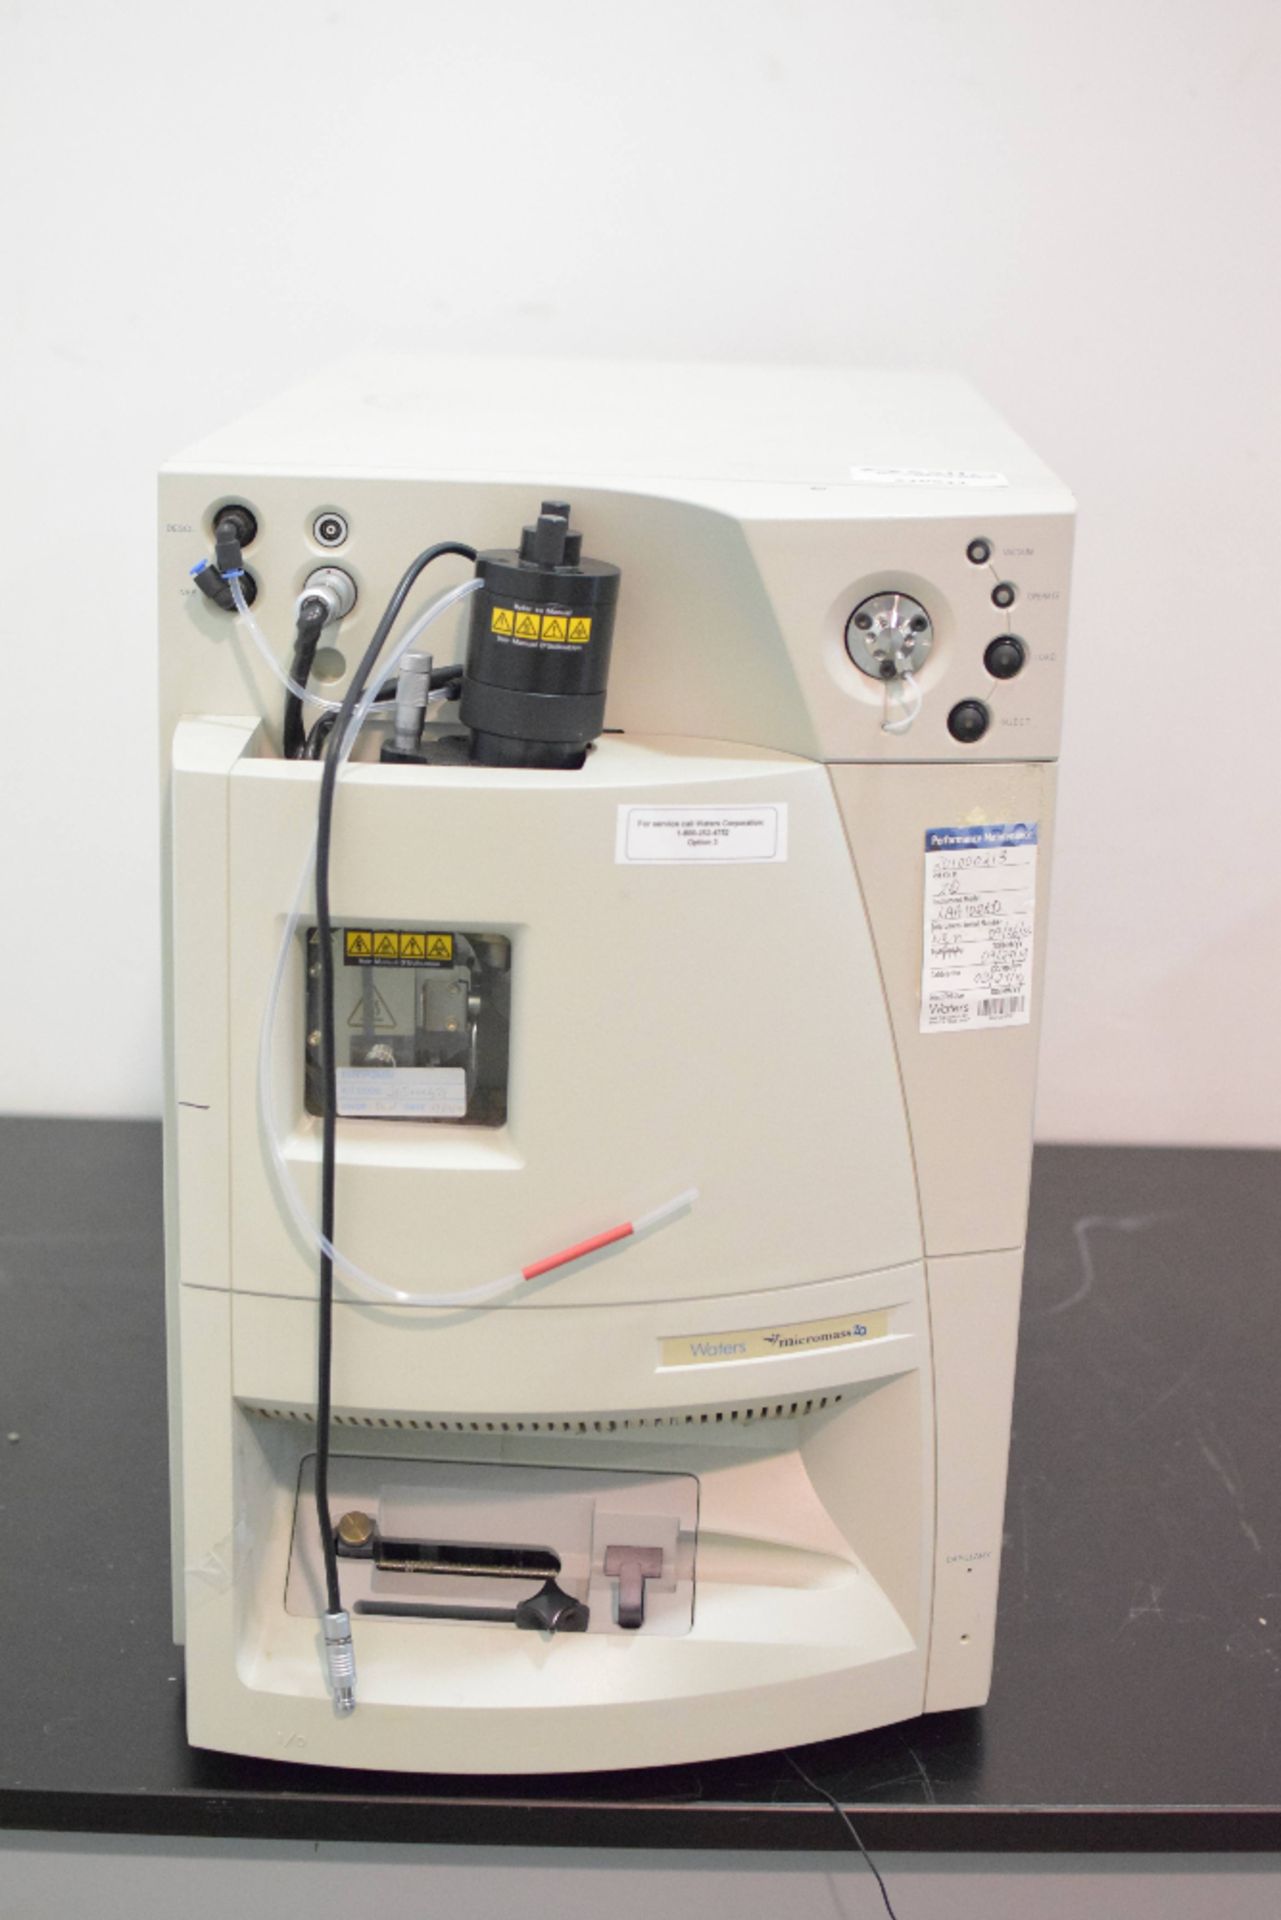 Waters Micromass ZQ 2000 Spectrometer